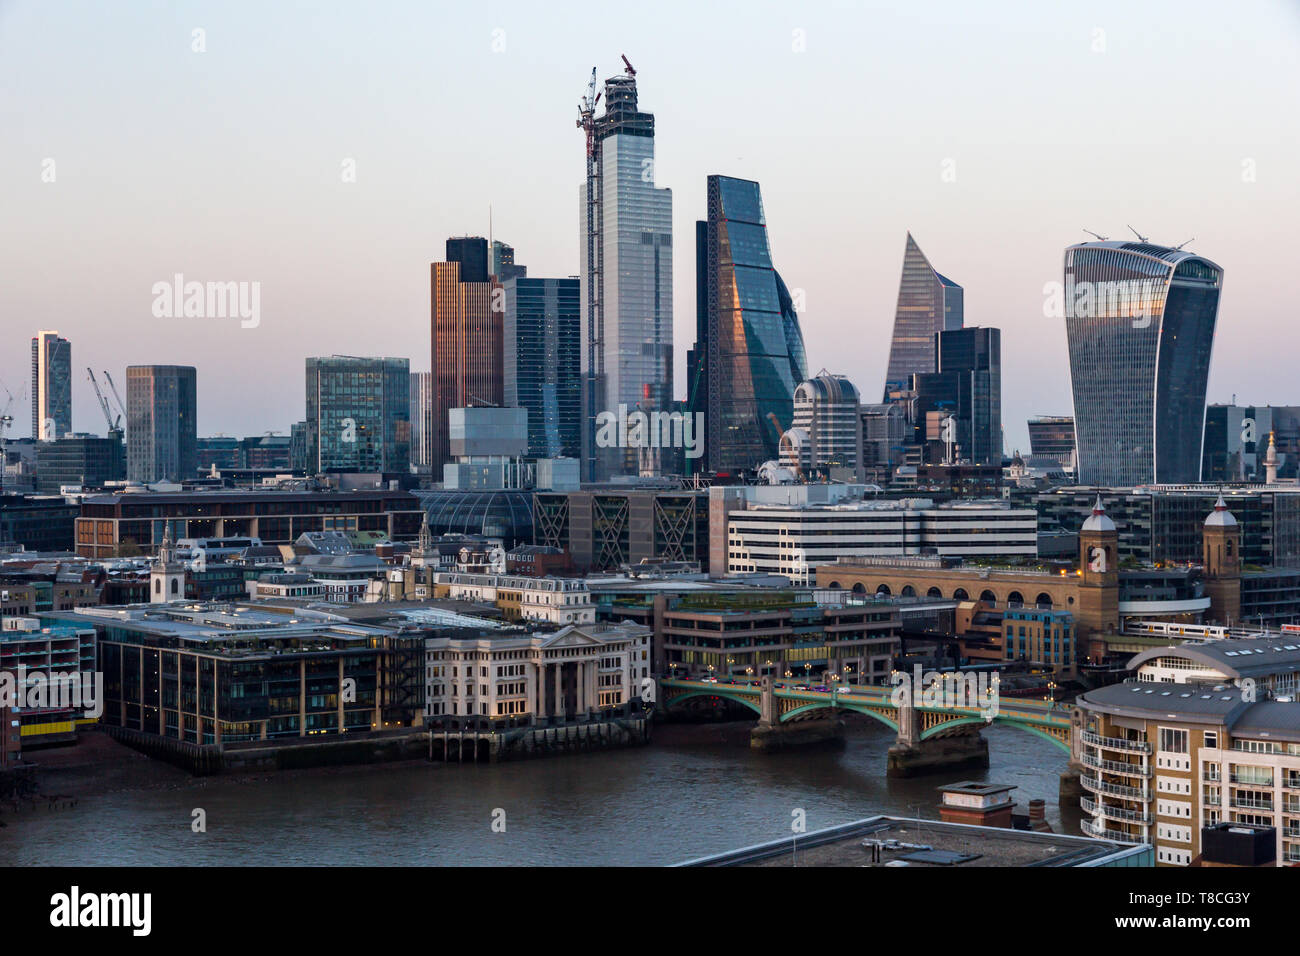 The bold and imposing City of London skyscrapers reflect a golden colour at sunset with a clear sky and the River Thames in the foreground Stock Photo